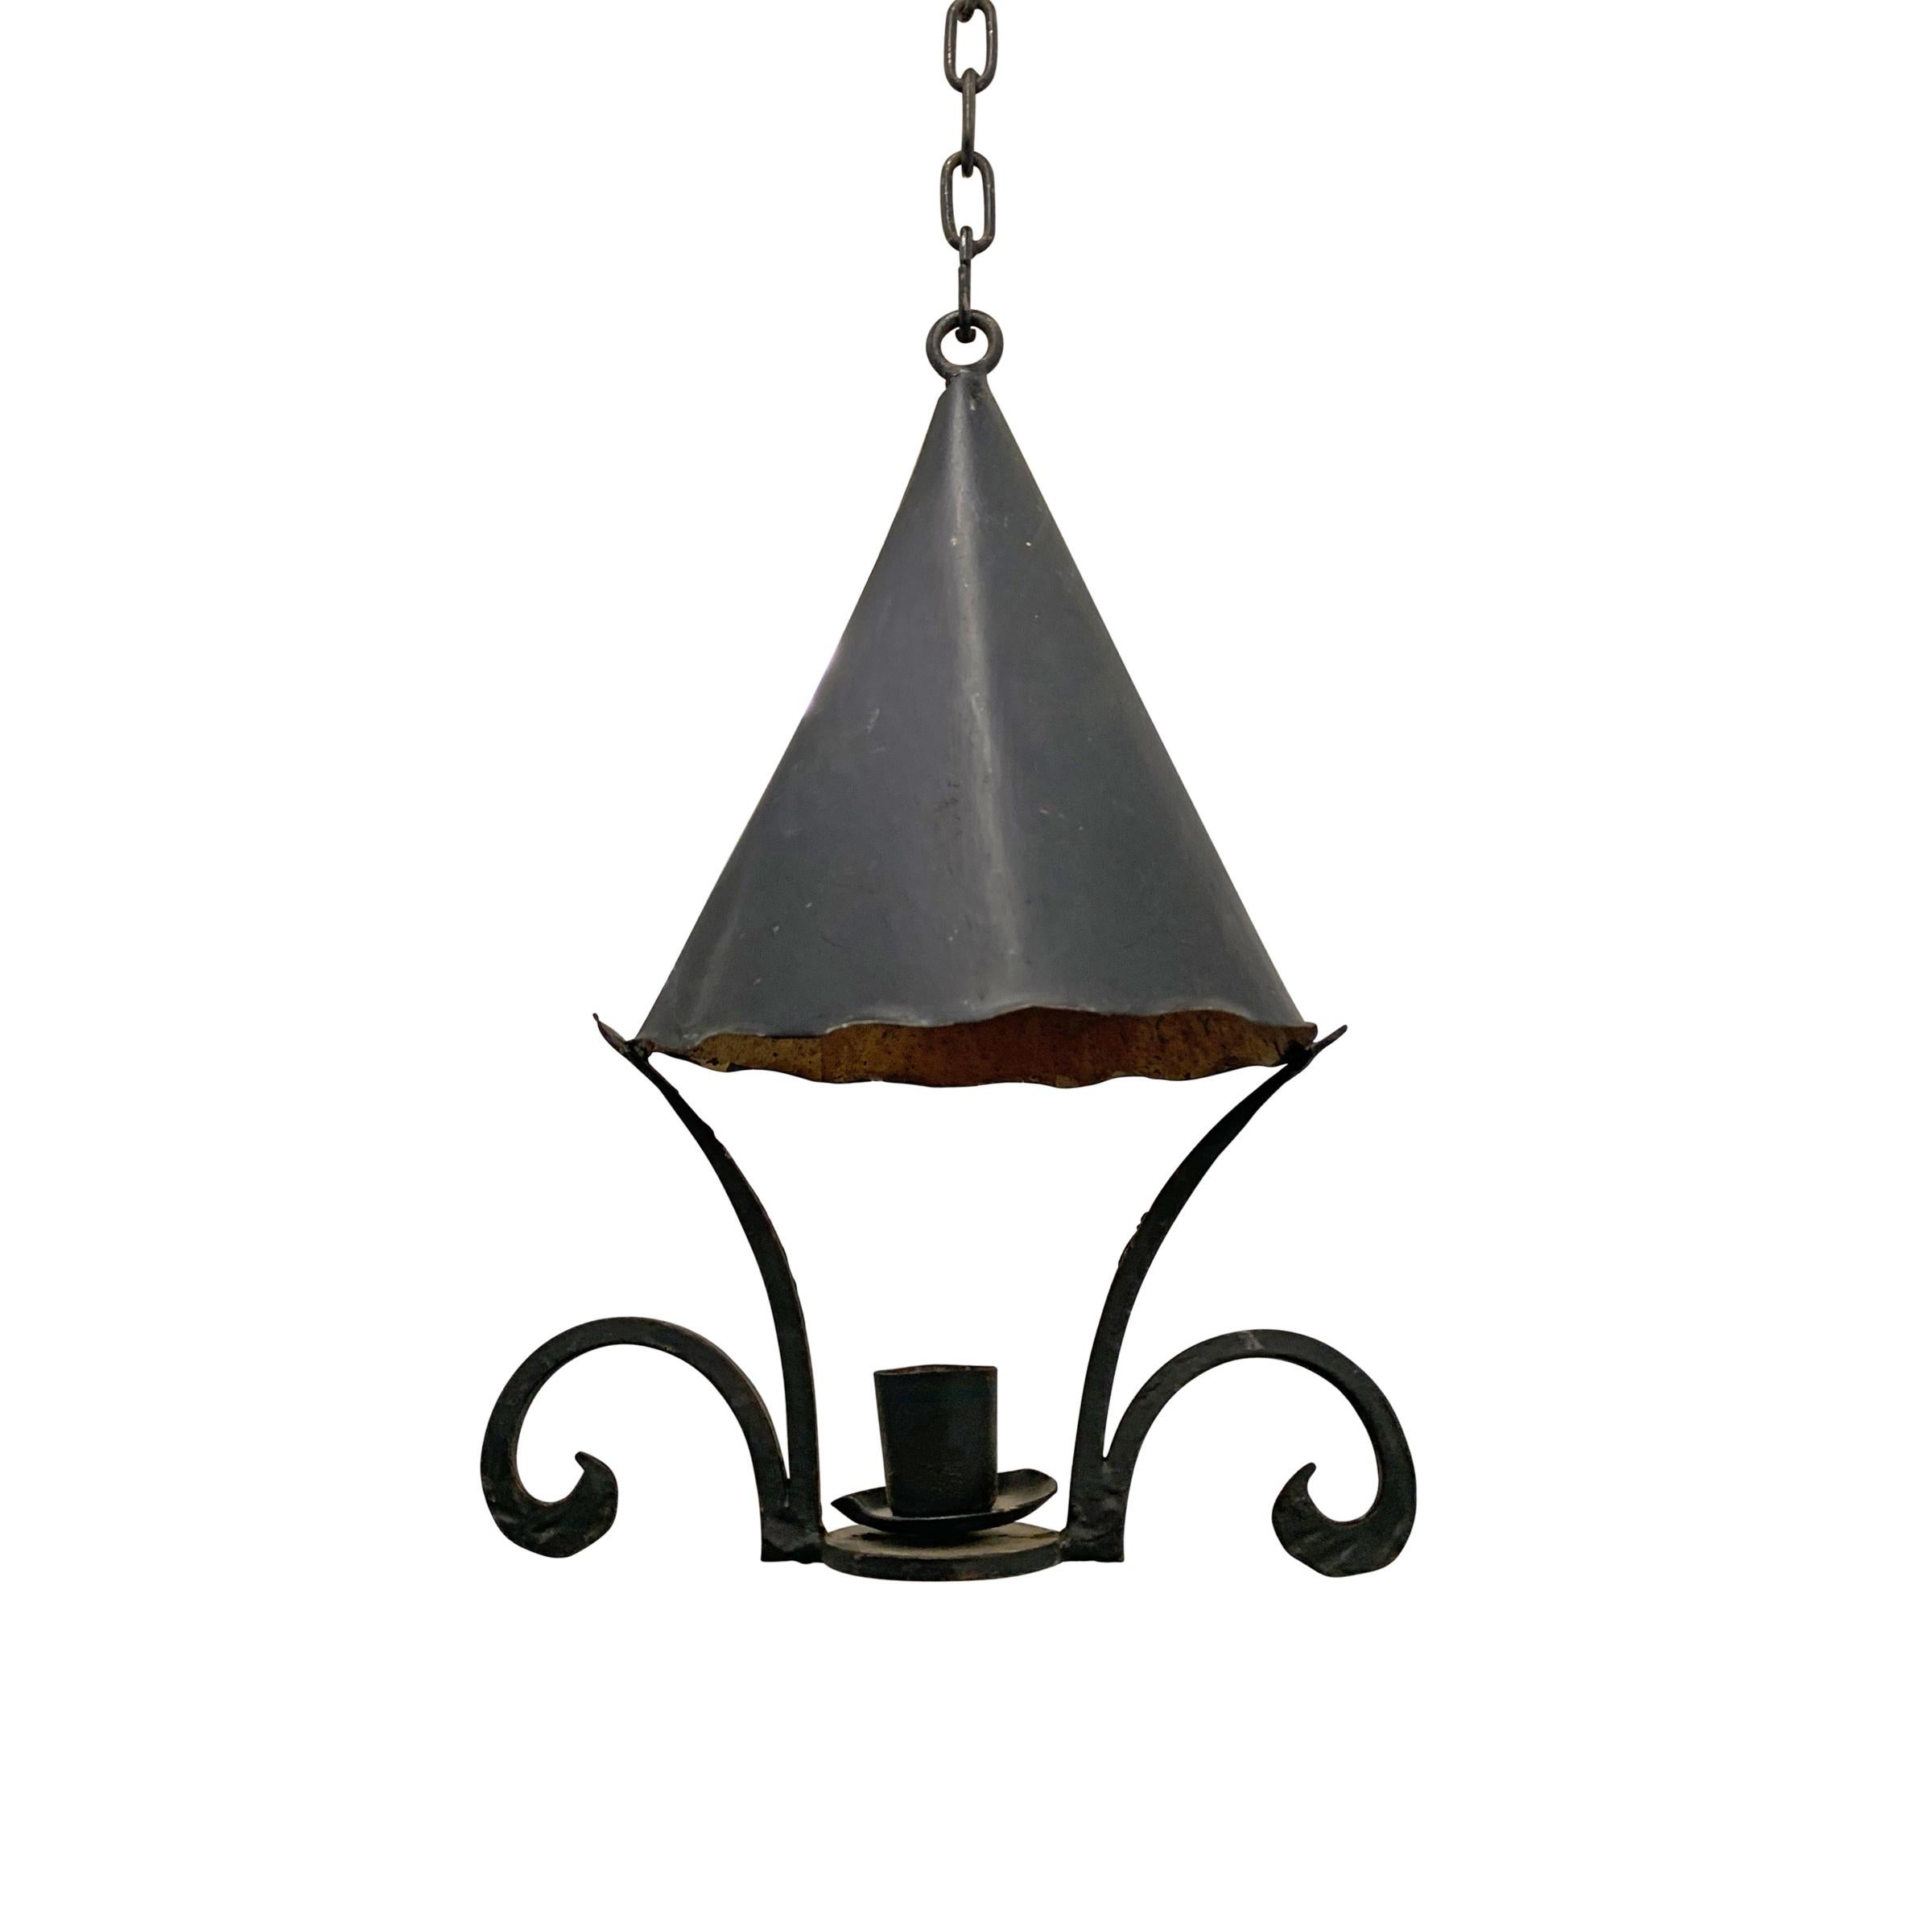 A charming early 20th century American iron light fixture with a gilt-lined cone-shaped dome suspended over a single 